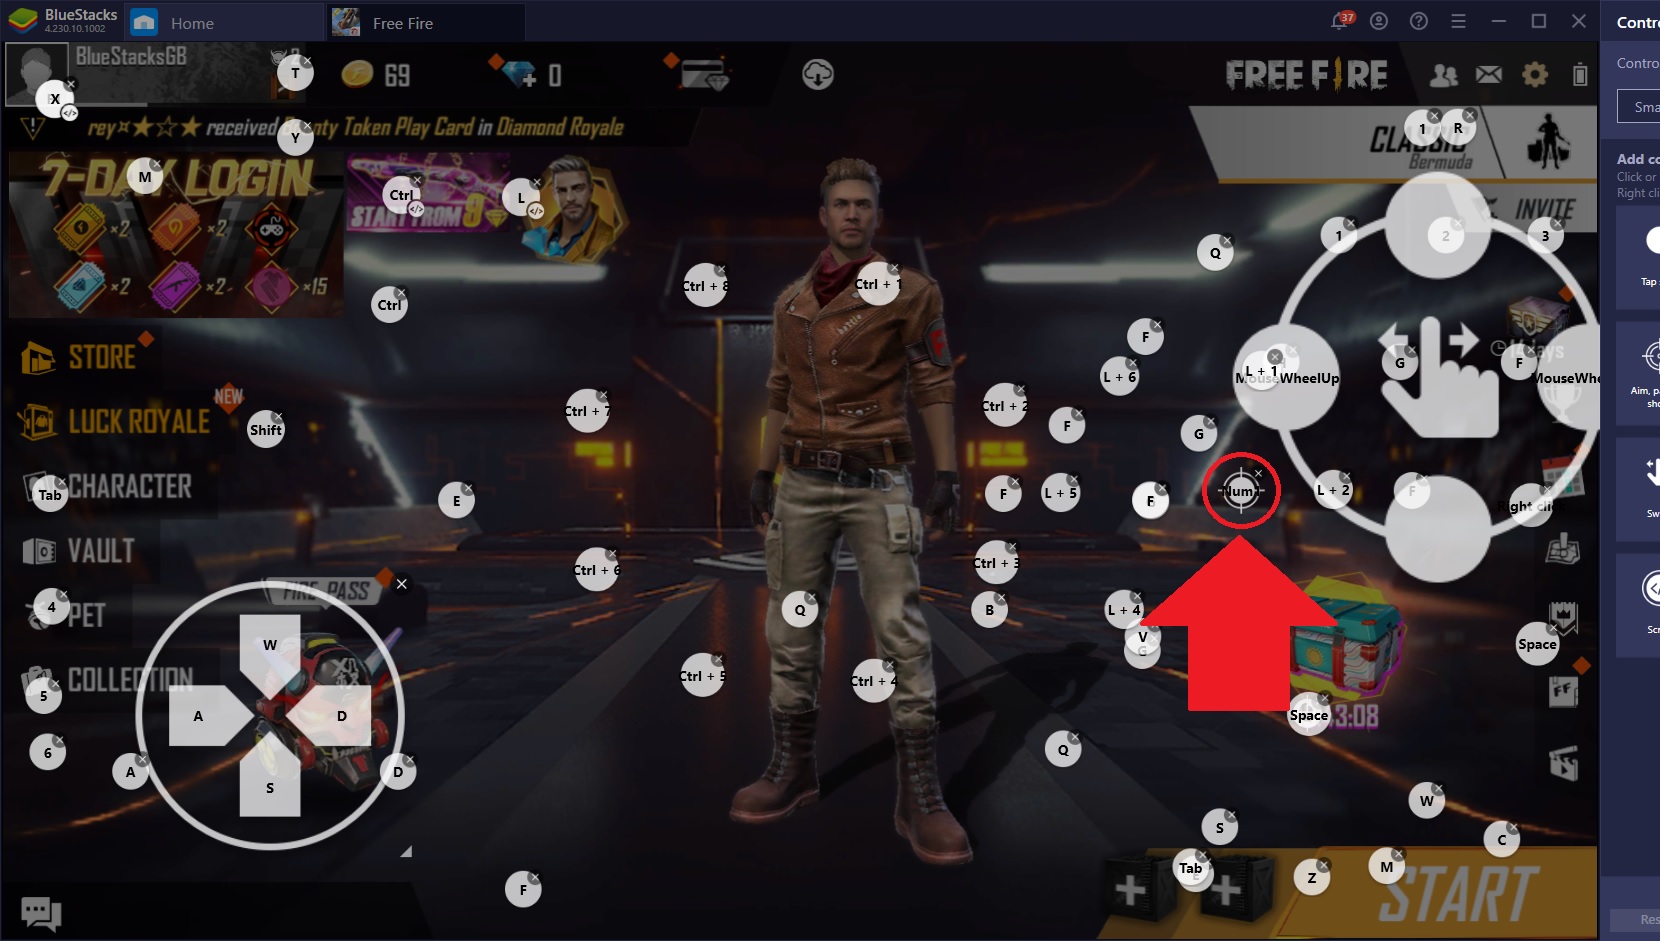 How to play Free Fire MAX on laptop using emulator